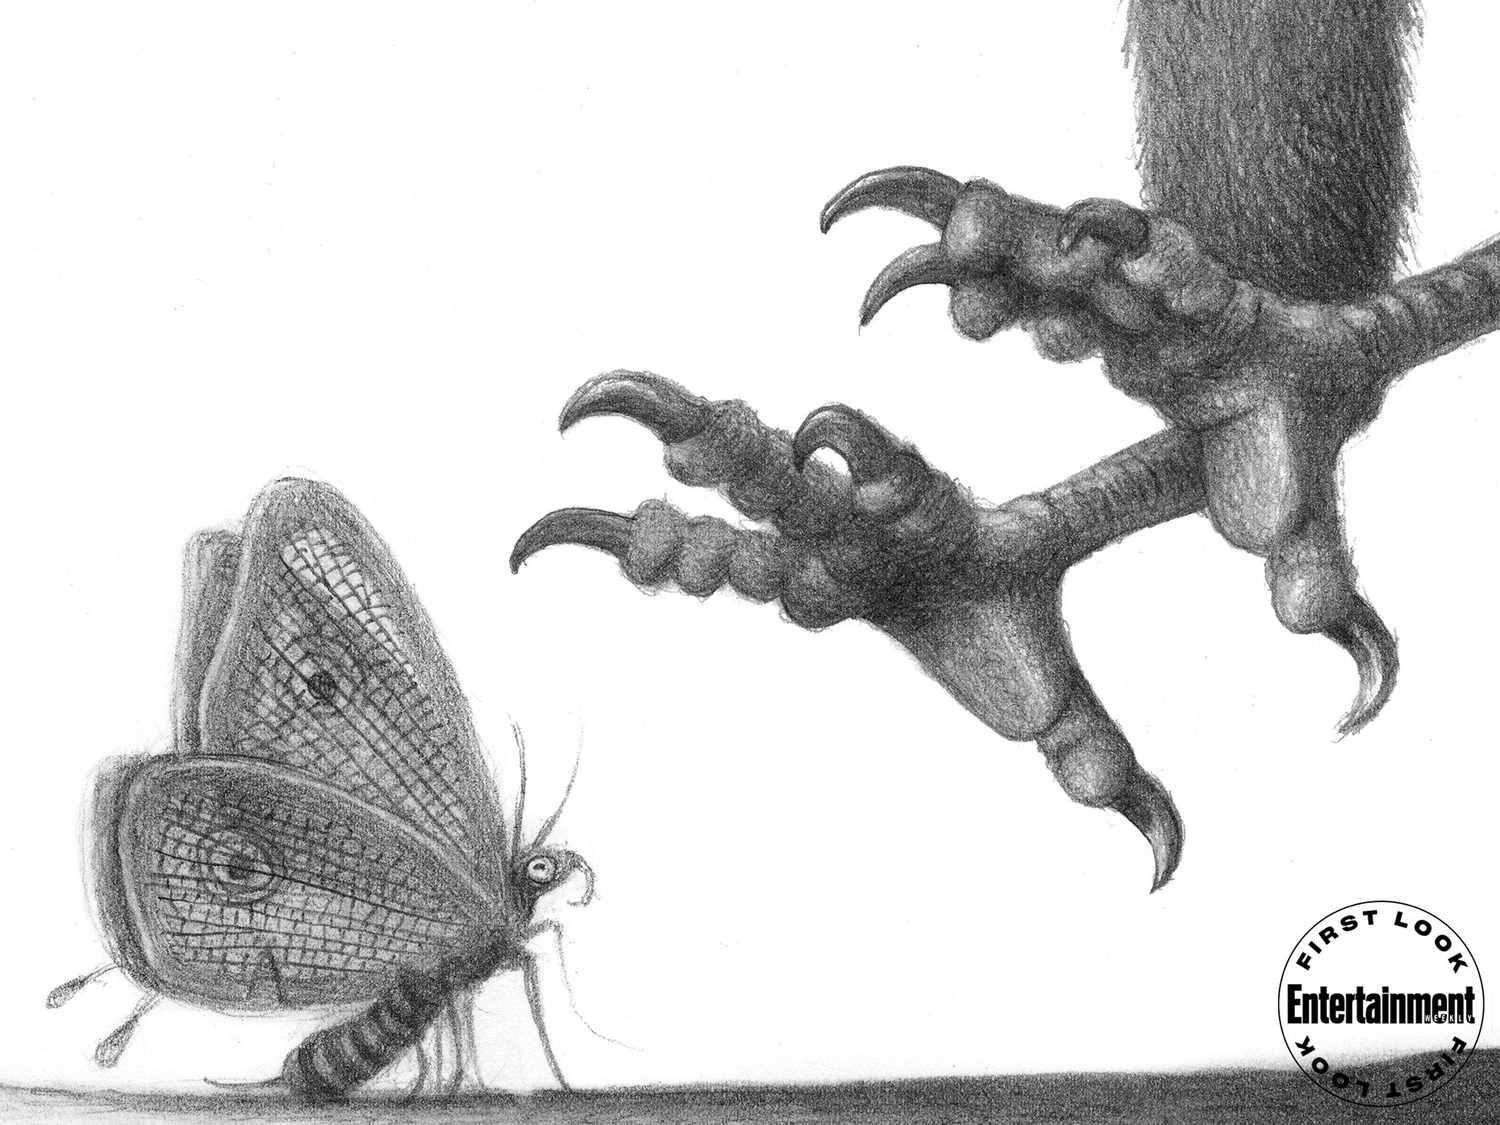 Exclusive excerpt from Big Tree by Brian Selznick